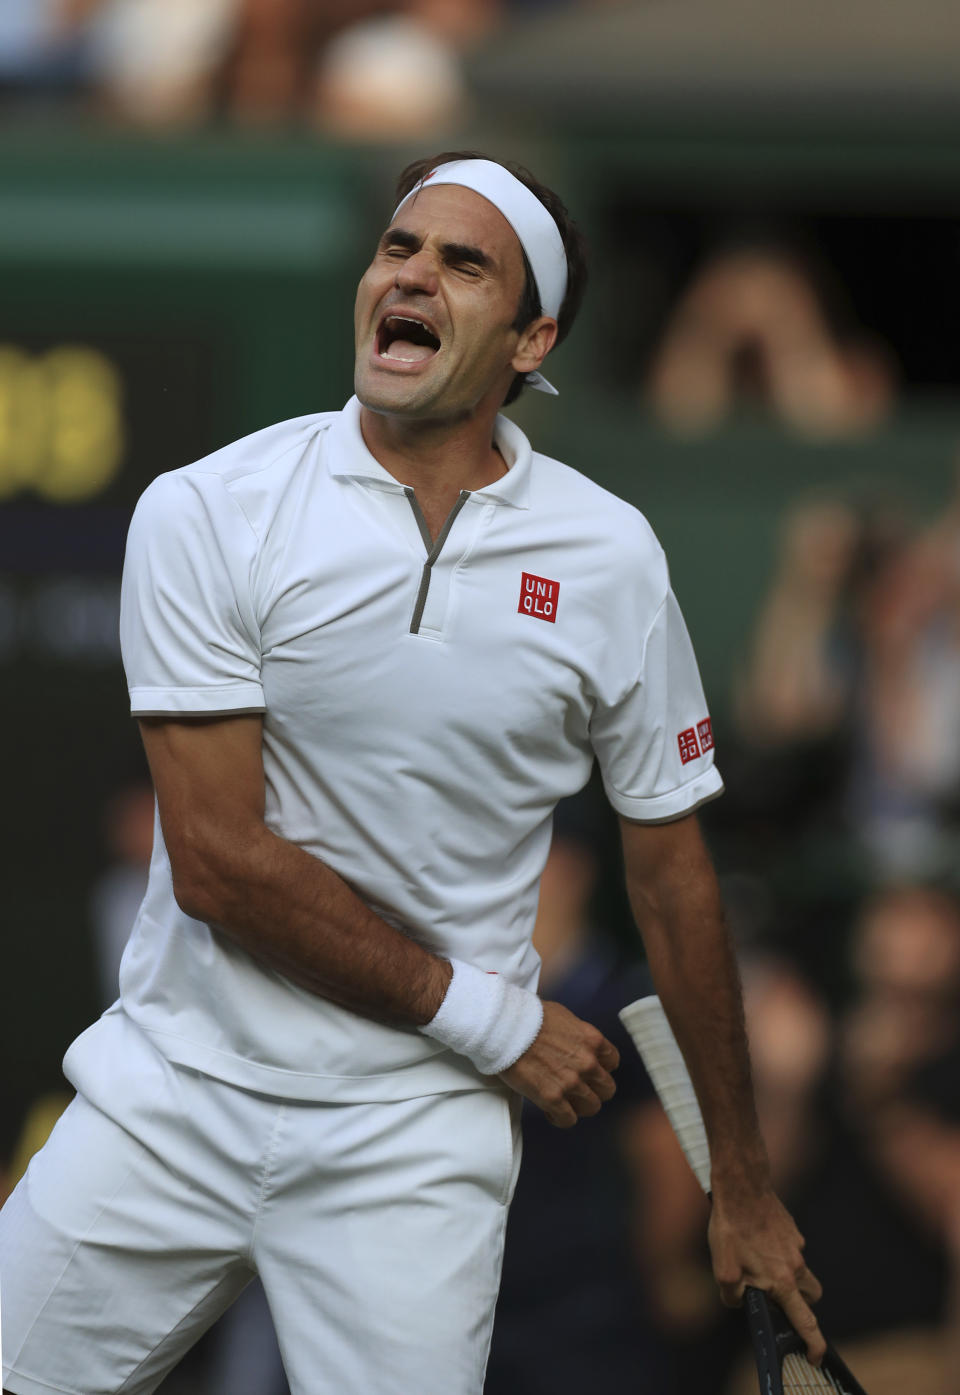 Switzerland's Roger Federer celebrates after beating Spain's Rafael Nadal in a Men's singles semifinal match on day eleven of the Wimbledon Tennis Championships in London, Friday, July 12, 2019. (Mike Egerton/Pool Photo via AP)